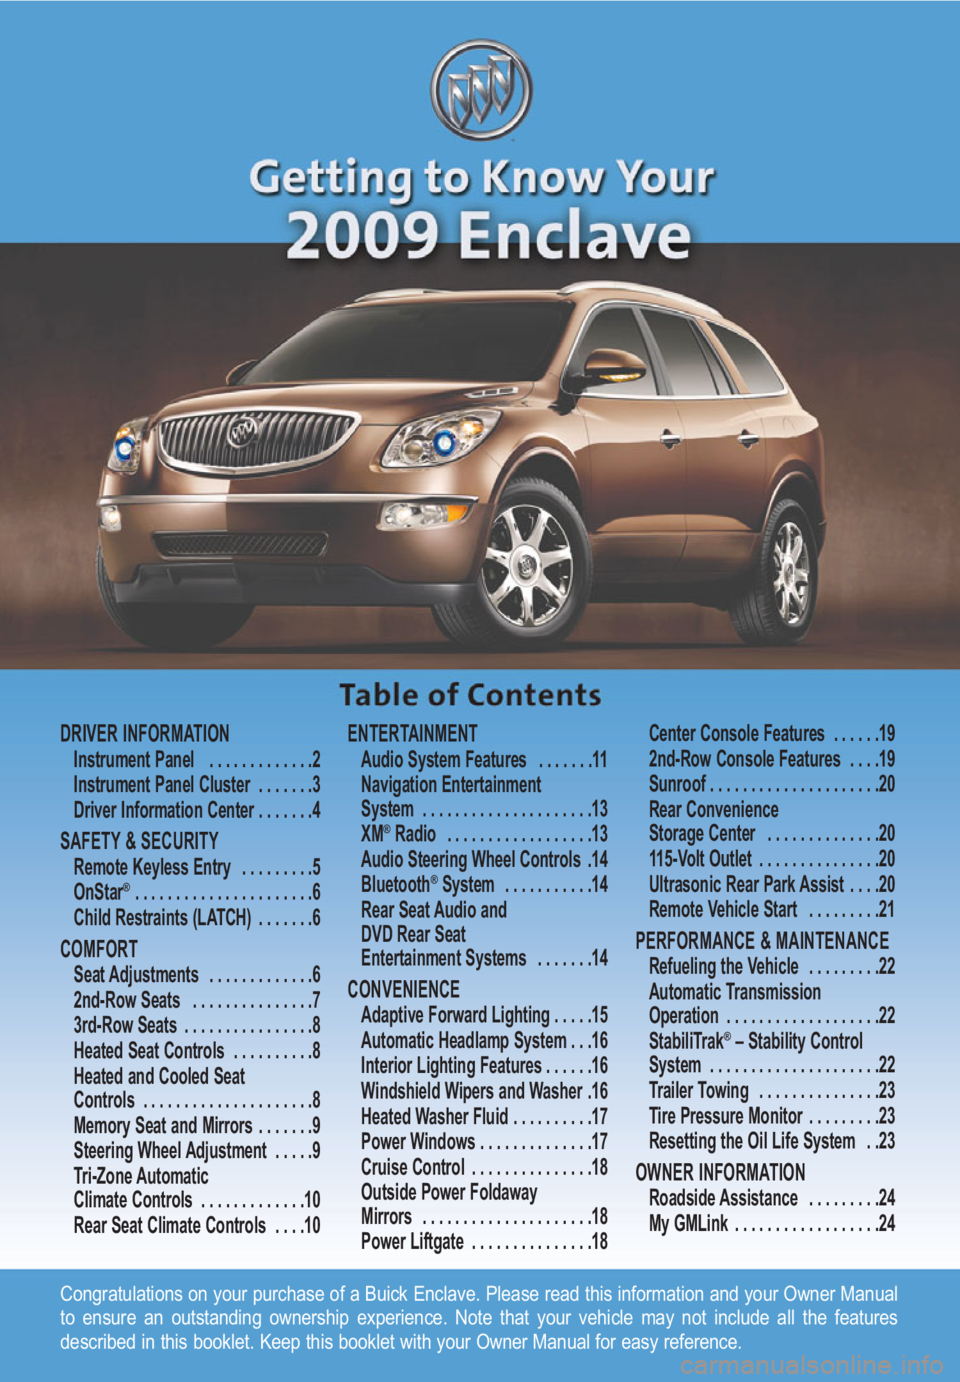 BUICK ENCLAVE 2009  Get To Know Guide Congratulations on your purchase of a Buick Enclave. Please read this information and your Owner Manual
to ensure an outstanding ownership experience. Note that your vehicle may not include all the fe